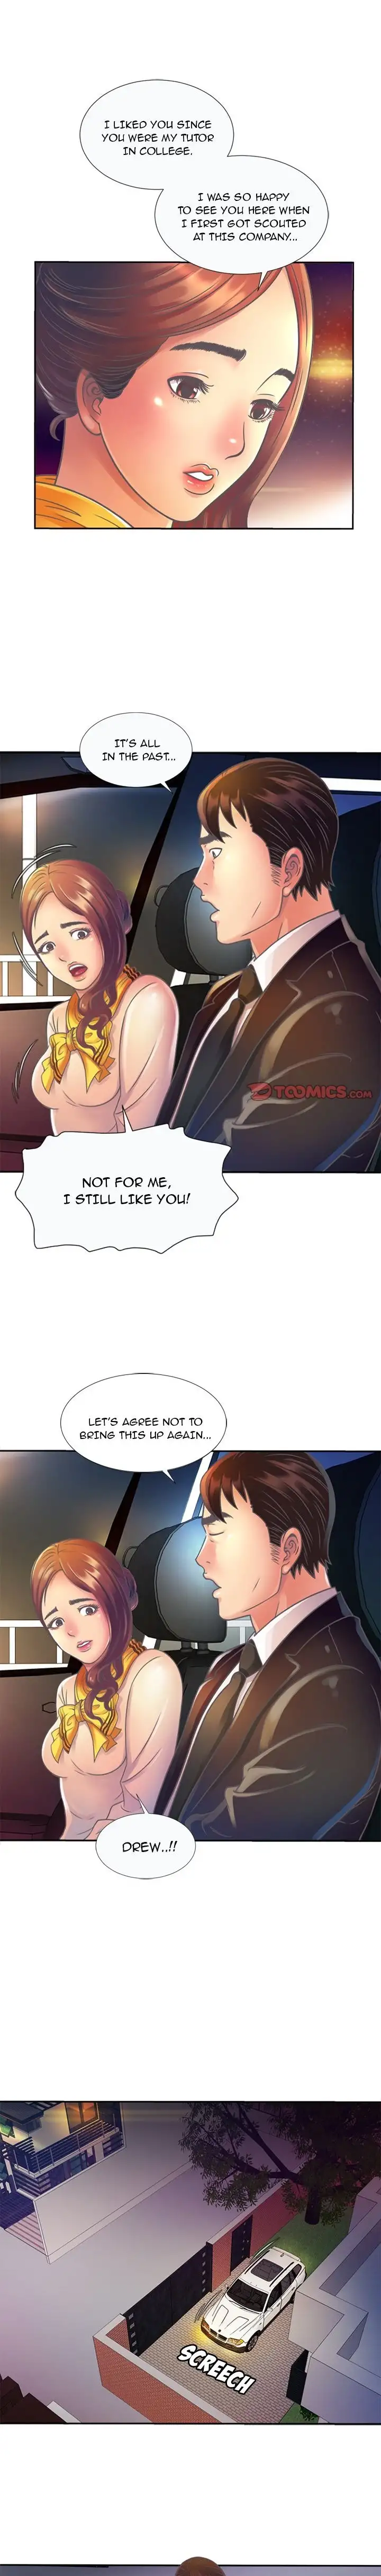 My Friend’s Dad - Chapter 3 Page 6